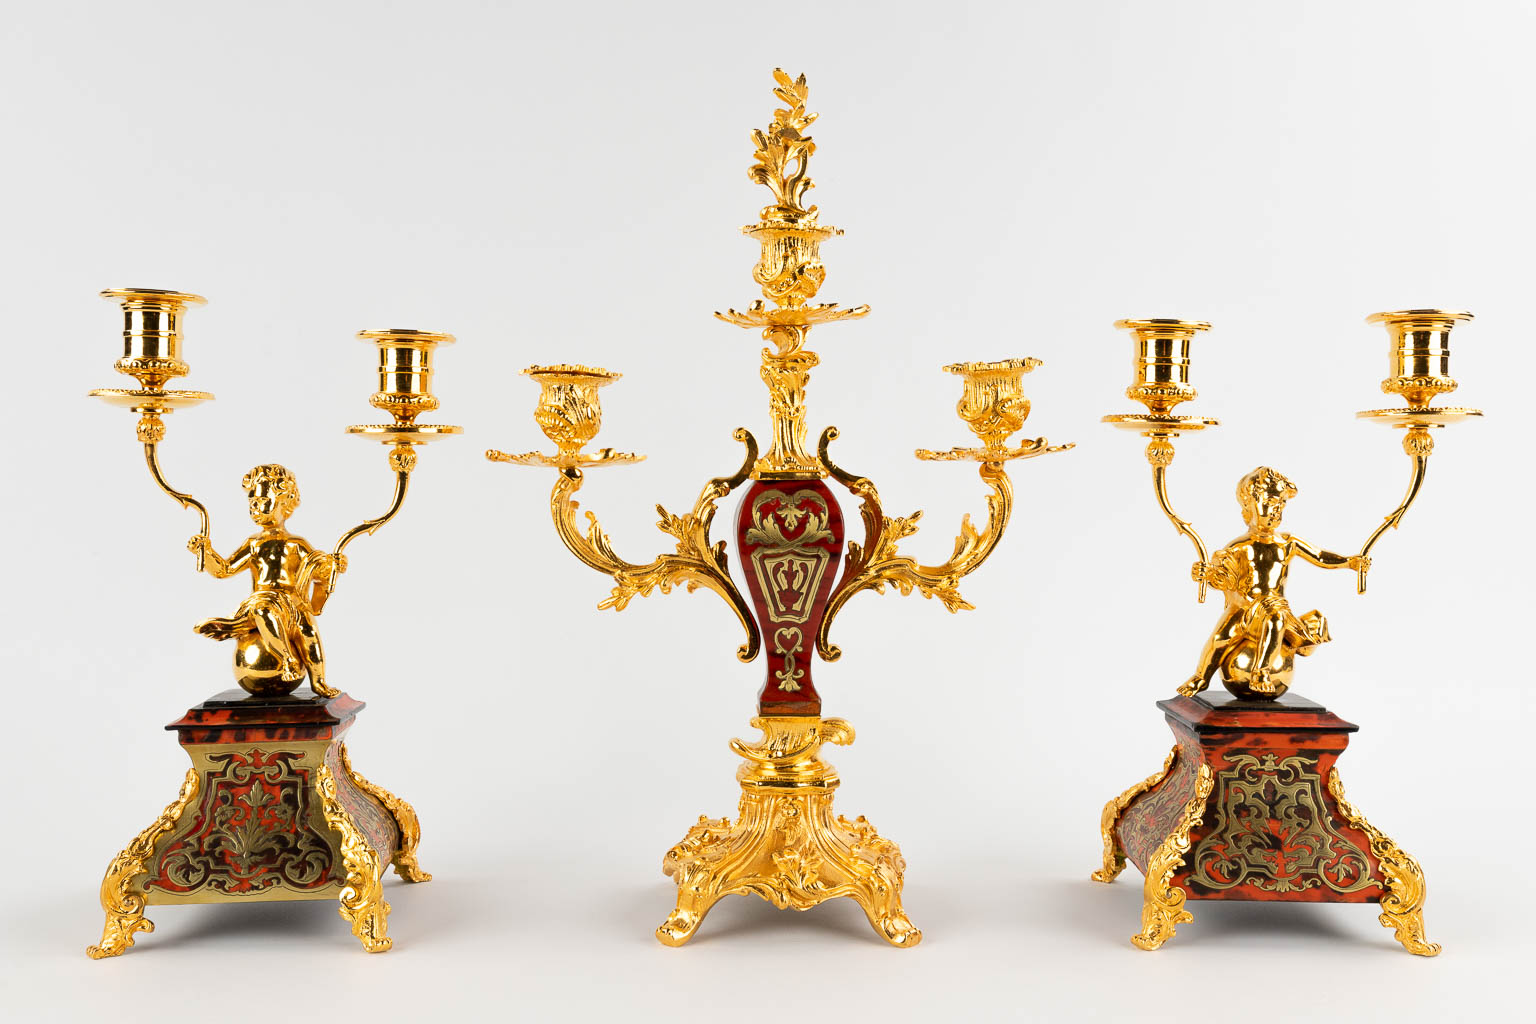 Three table candelabra, gilt bronze and Boulle, tortoise Shell and copper inlay. Napoleon 3, 19th C. (D:12 x W:26 x H:39 cm)